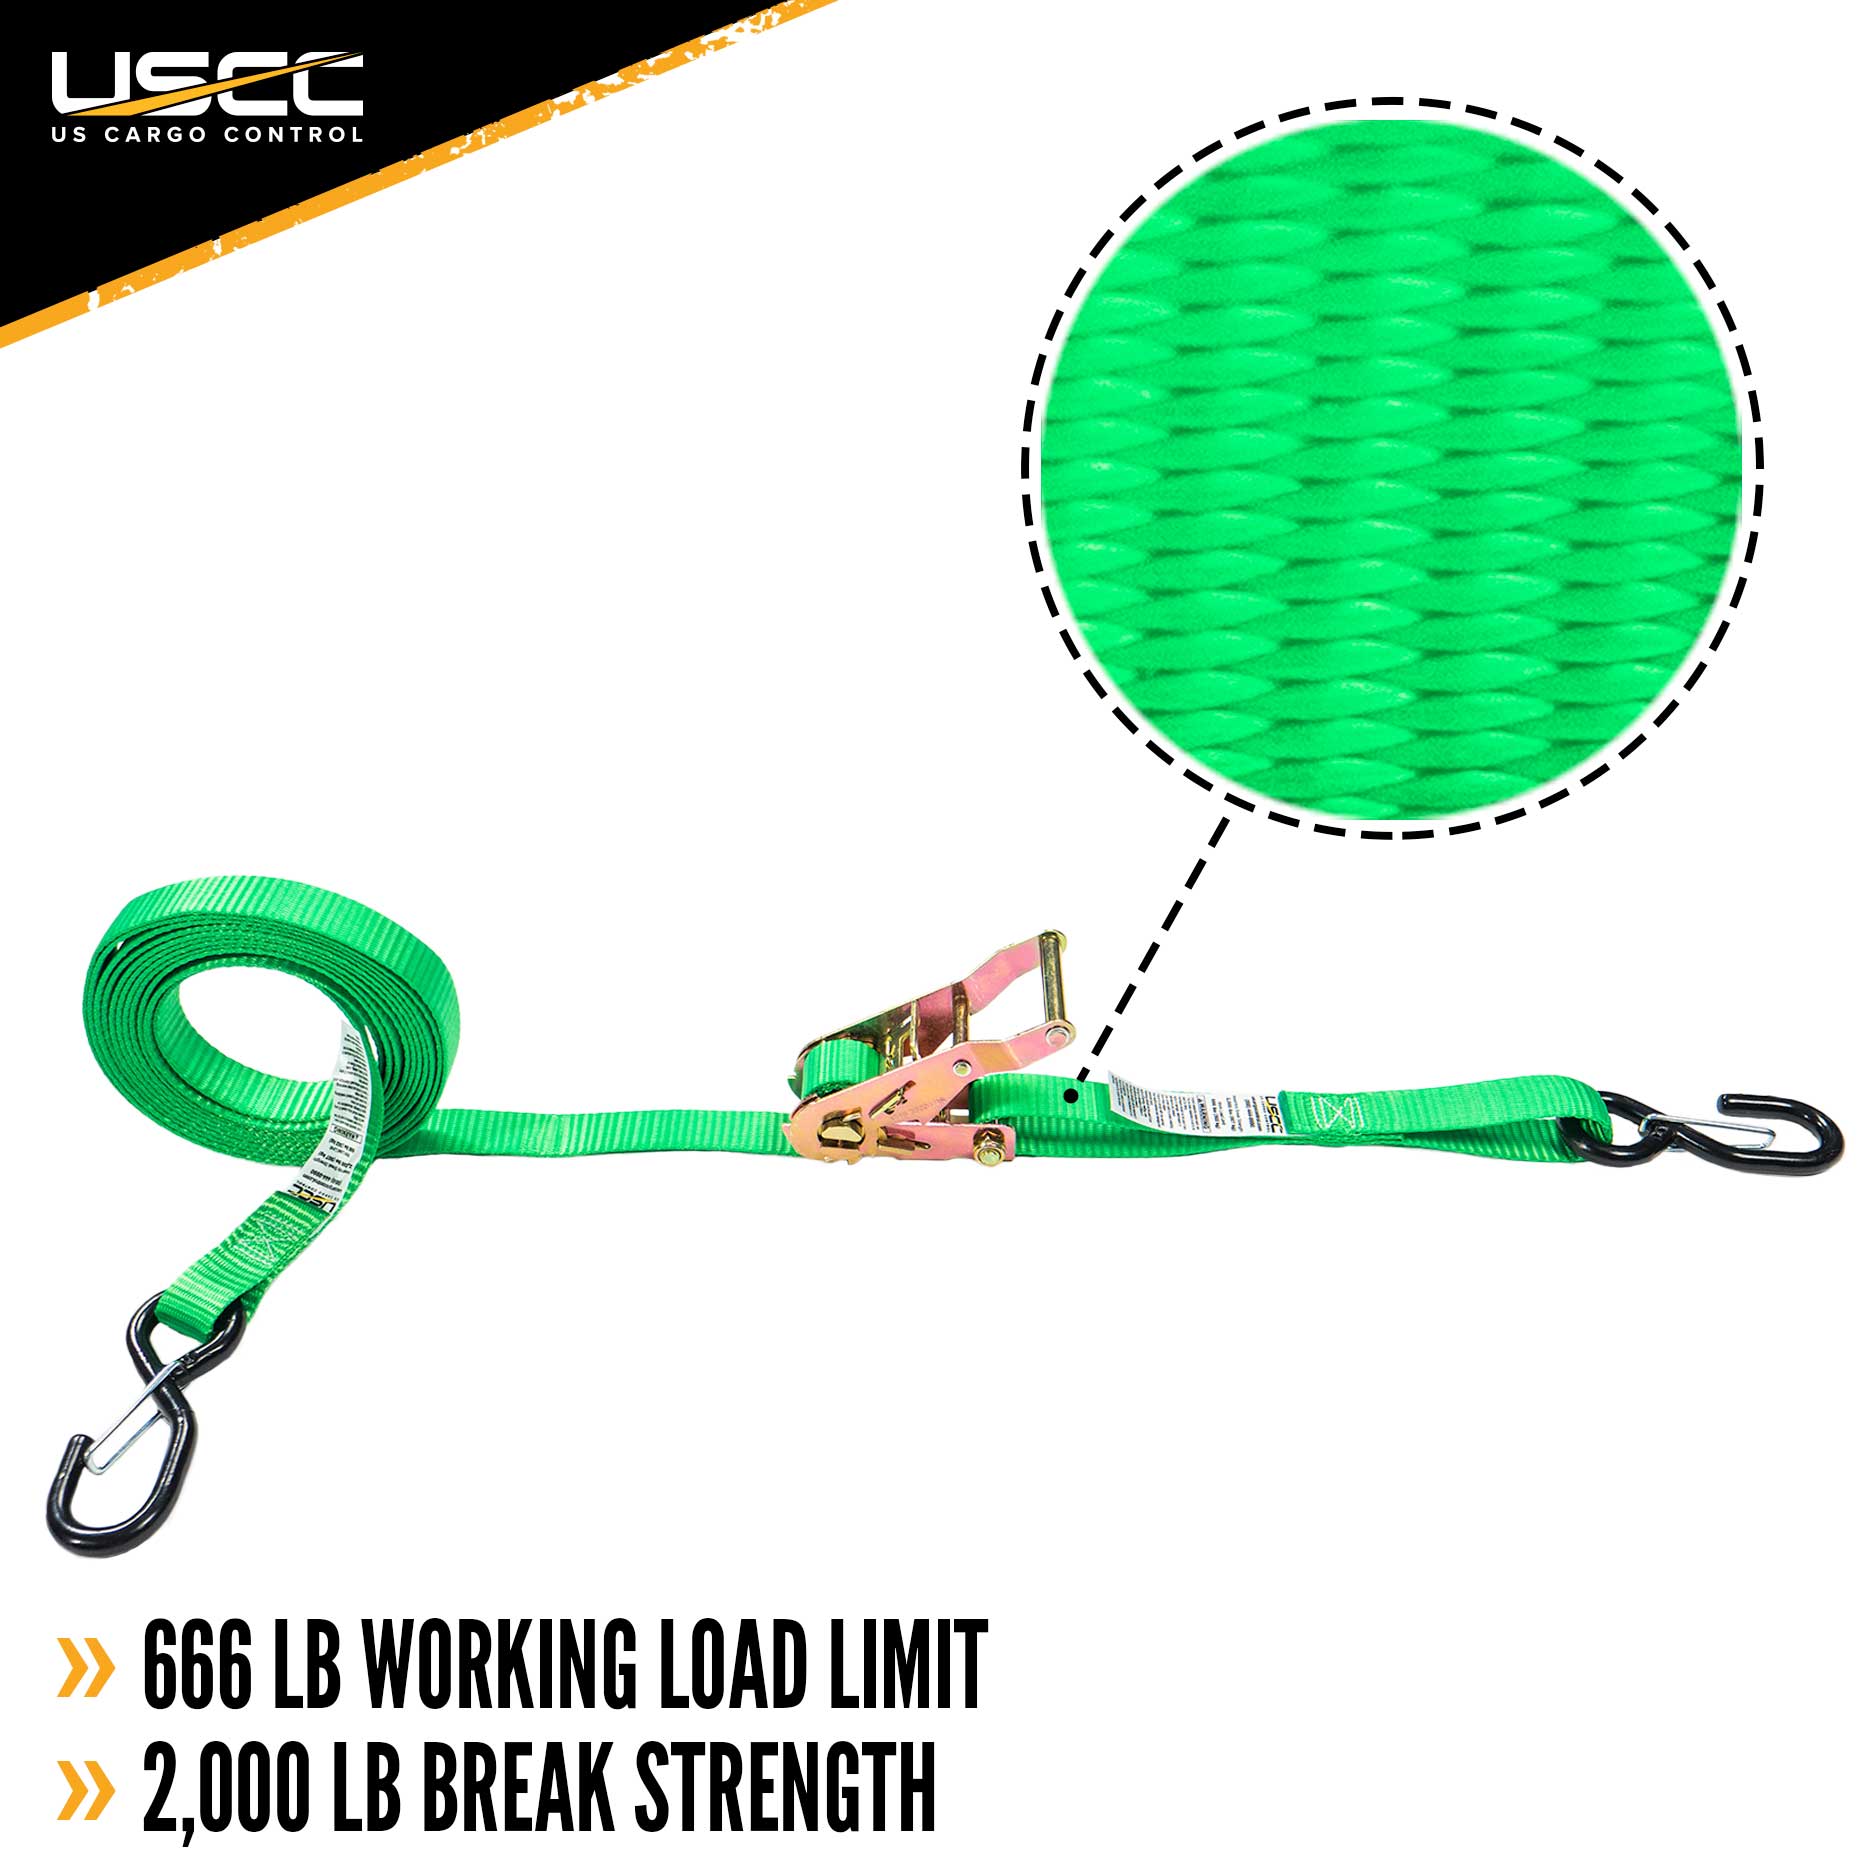 1" x 15' Green Ratchet Strap w/ S-Hook and Keeper